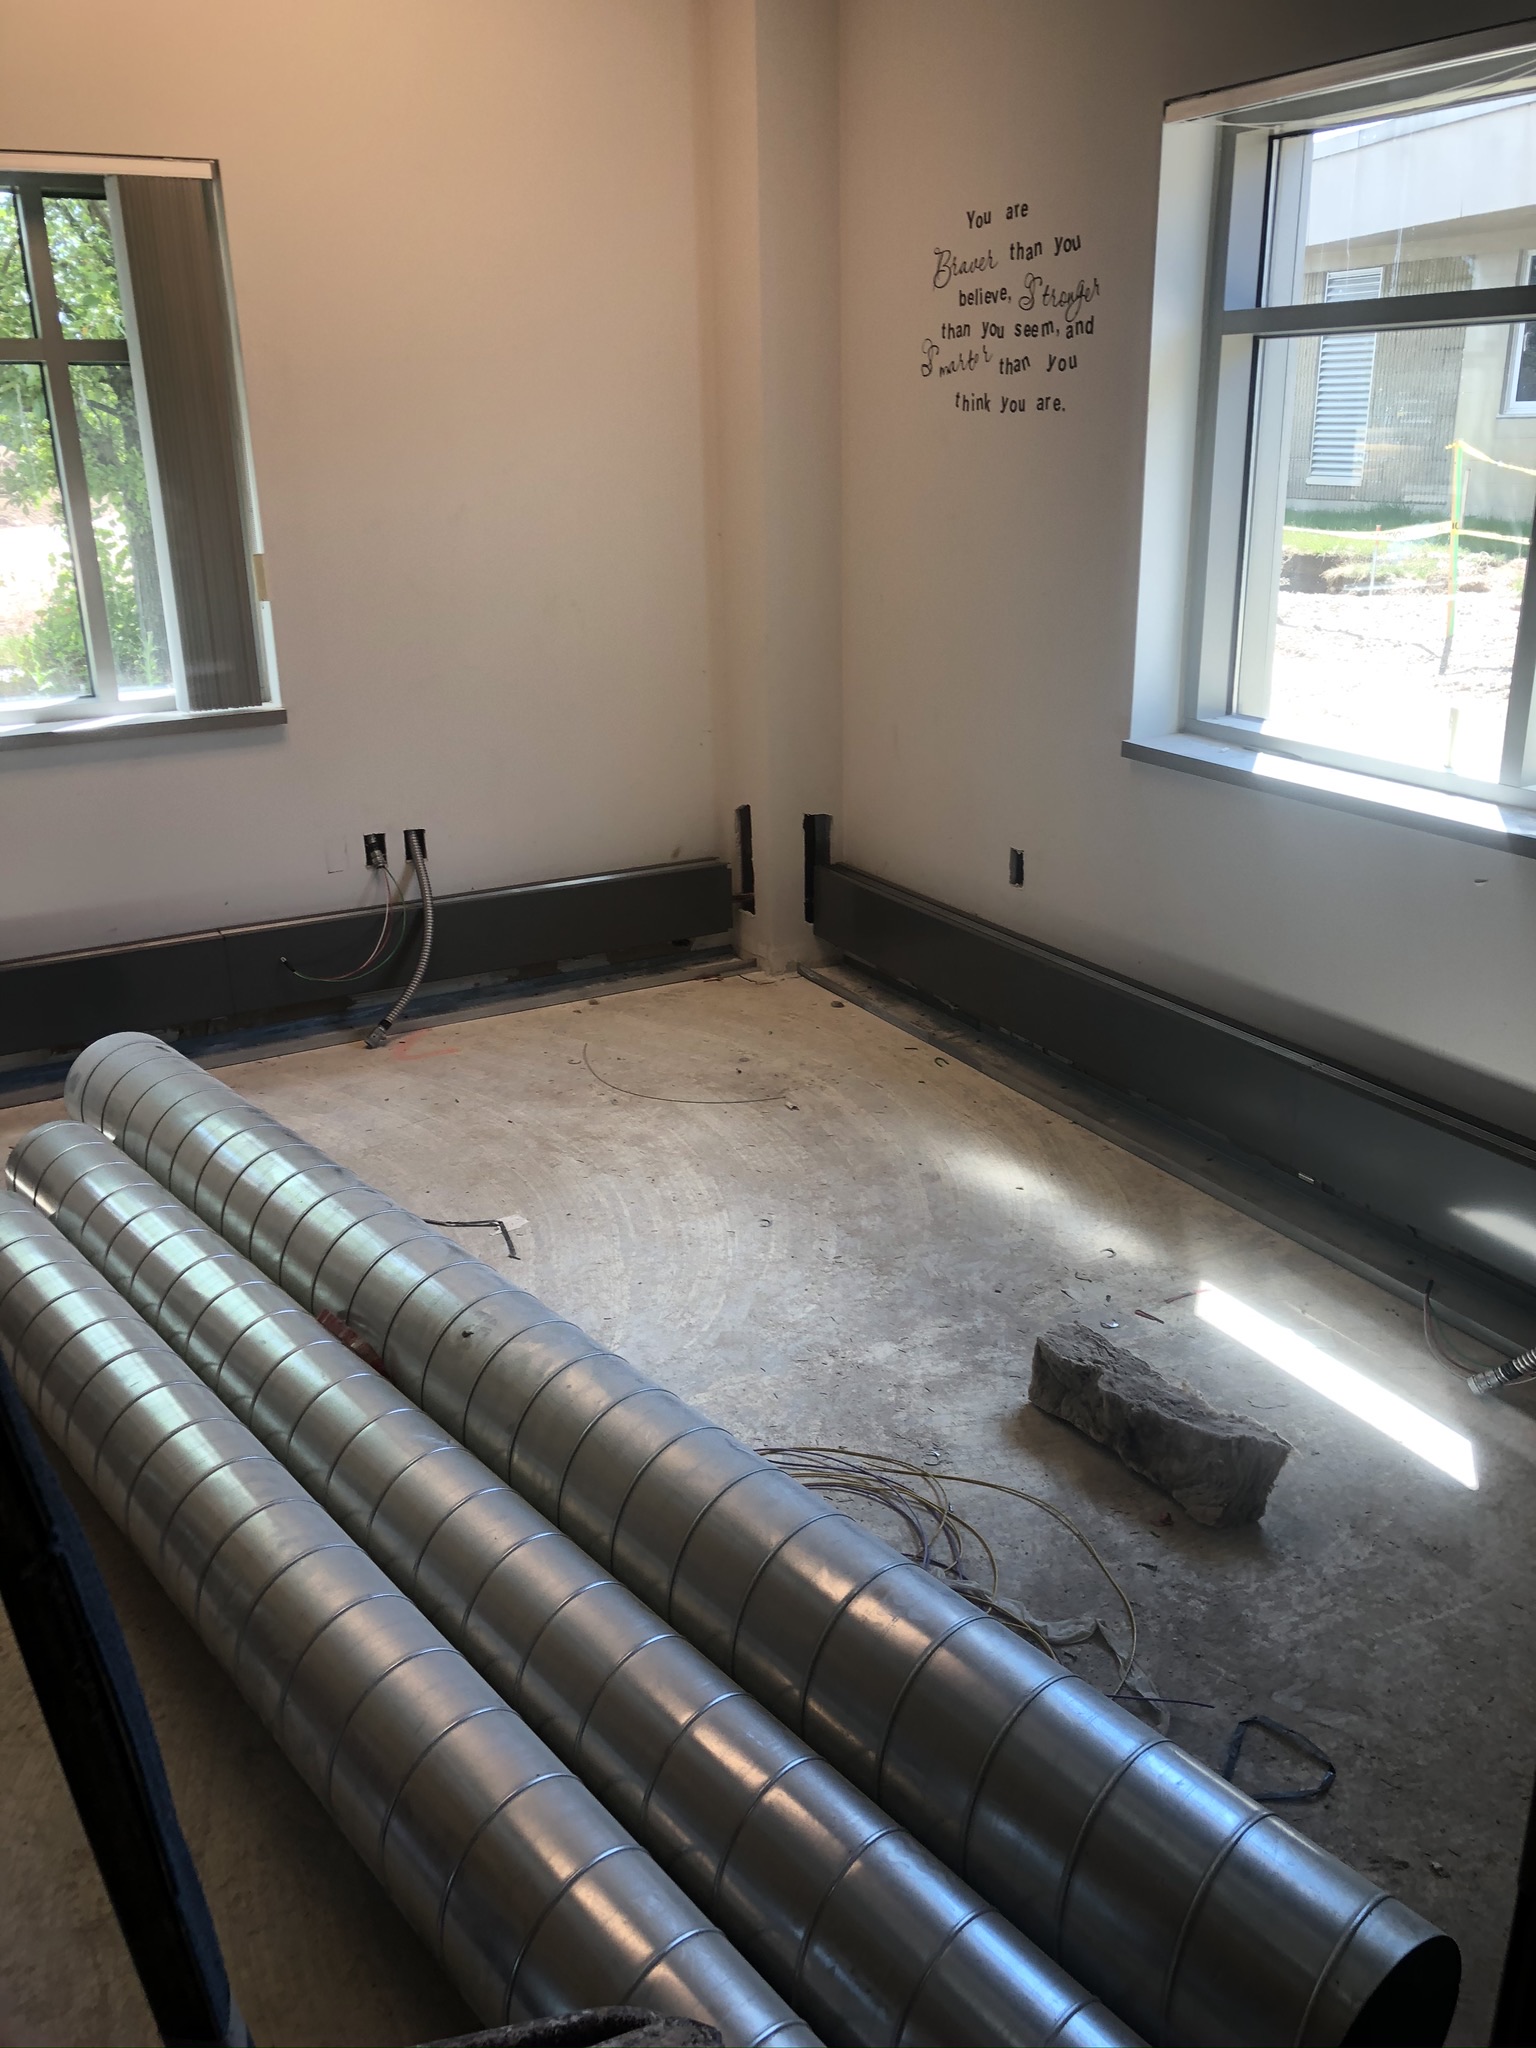 Air handling pipes on the floor in the main office area